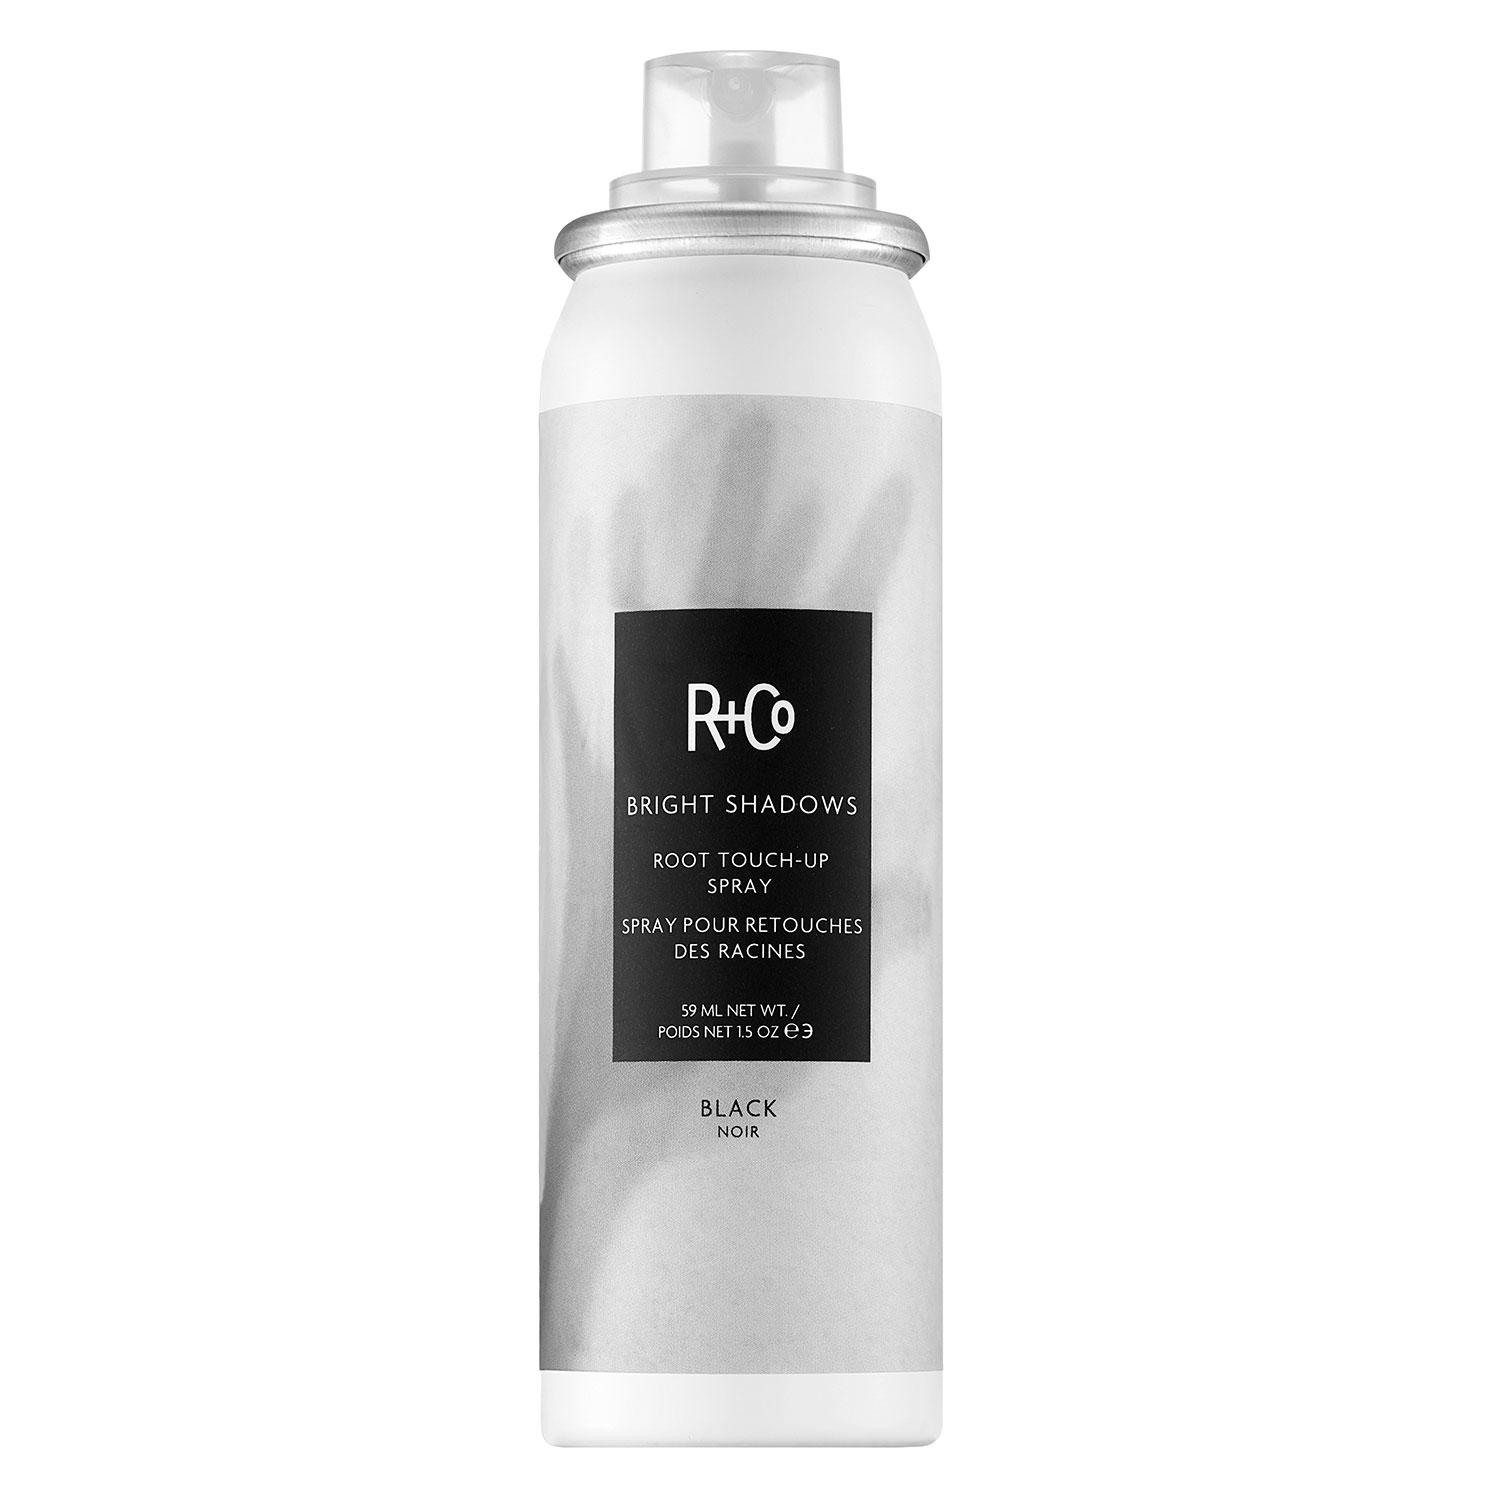 R+Co - Bright Shadows Root Touch-Up Spray Black